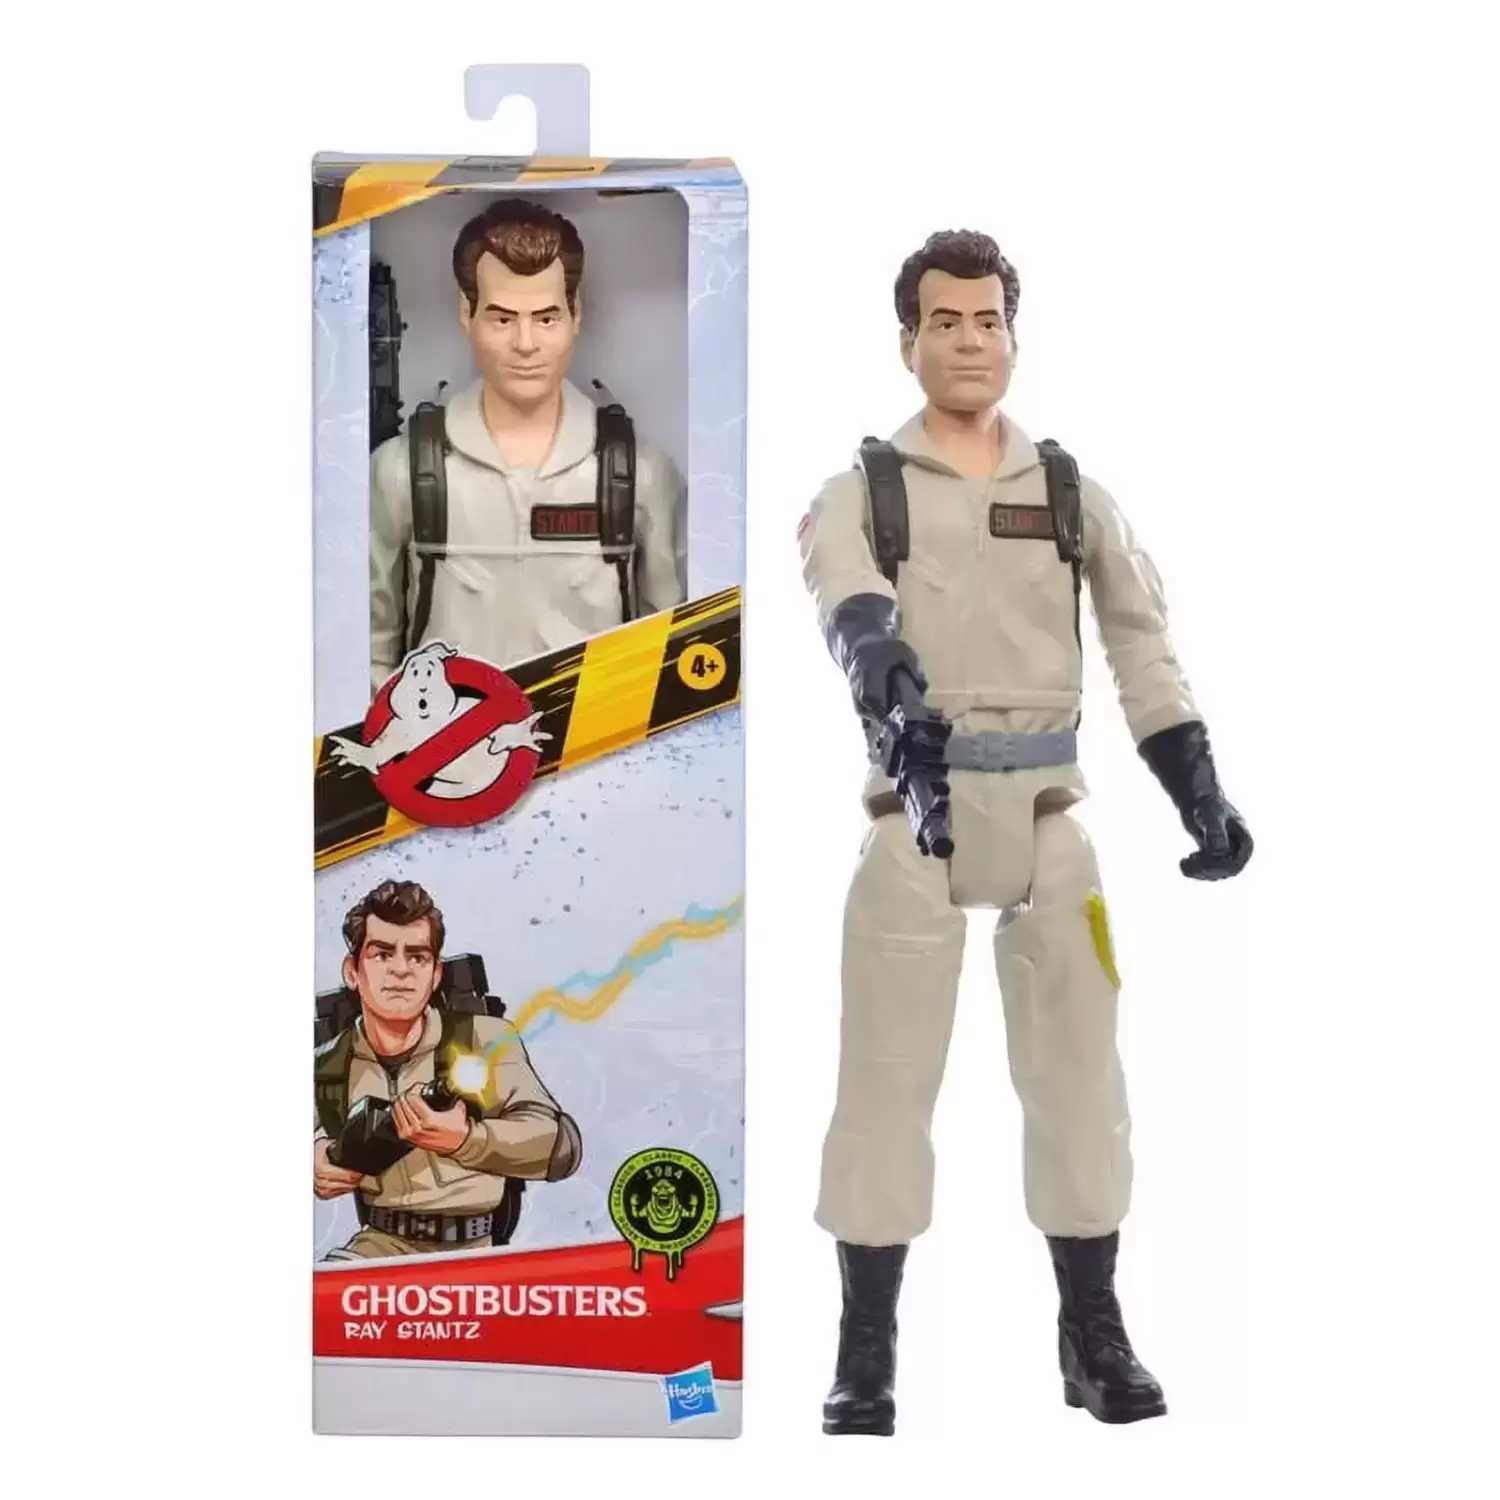 Ghostbusters 12-Inch Figures - Ray Stanz